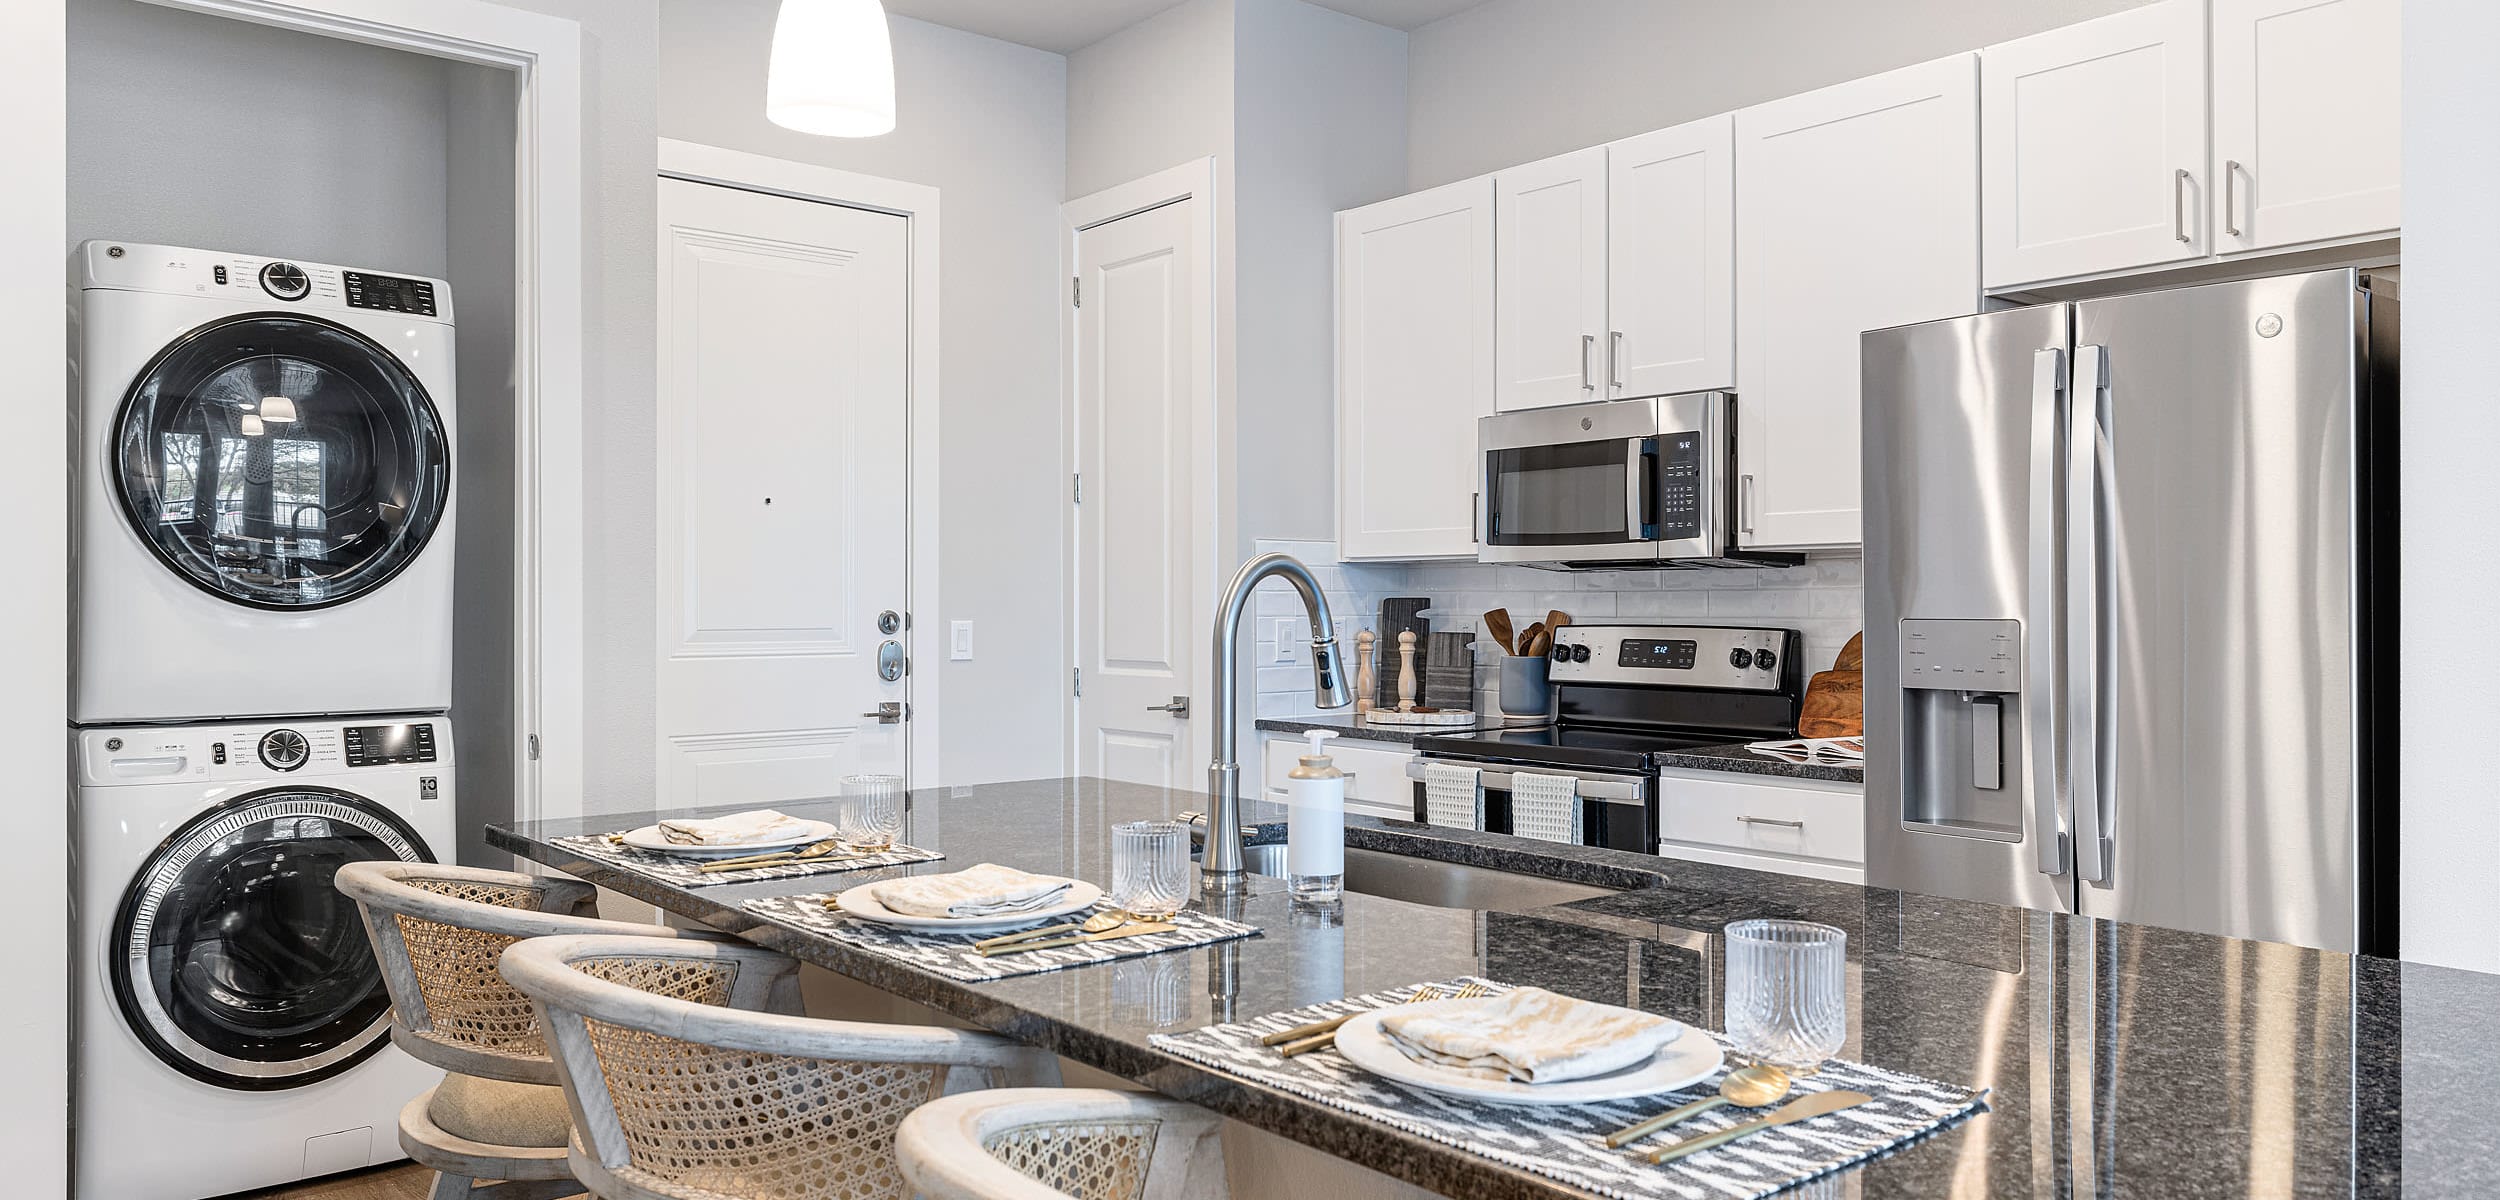 Model apartment kitchen featuring stainless steel appliances and breakfast bar seating at The Avery in Austin, Texas